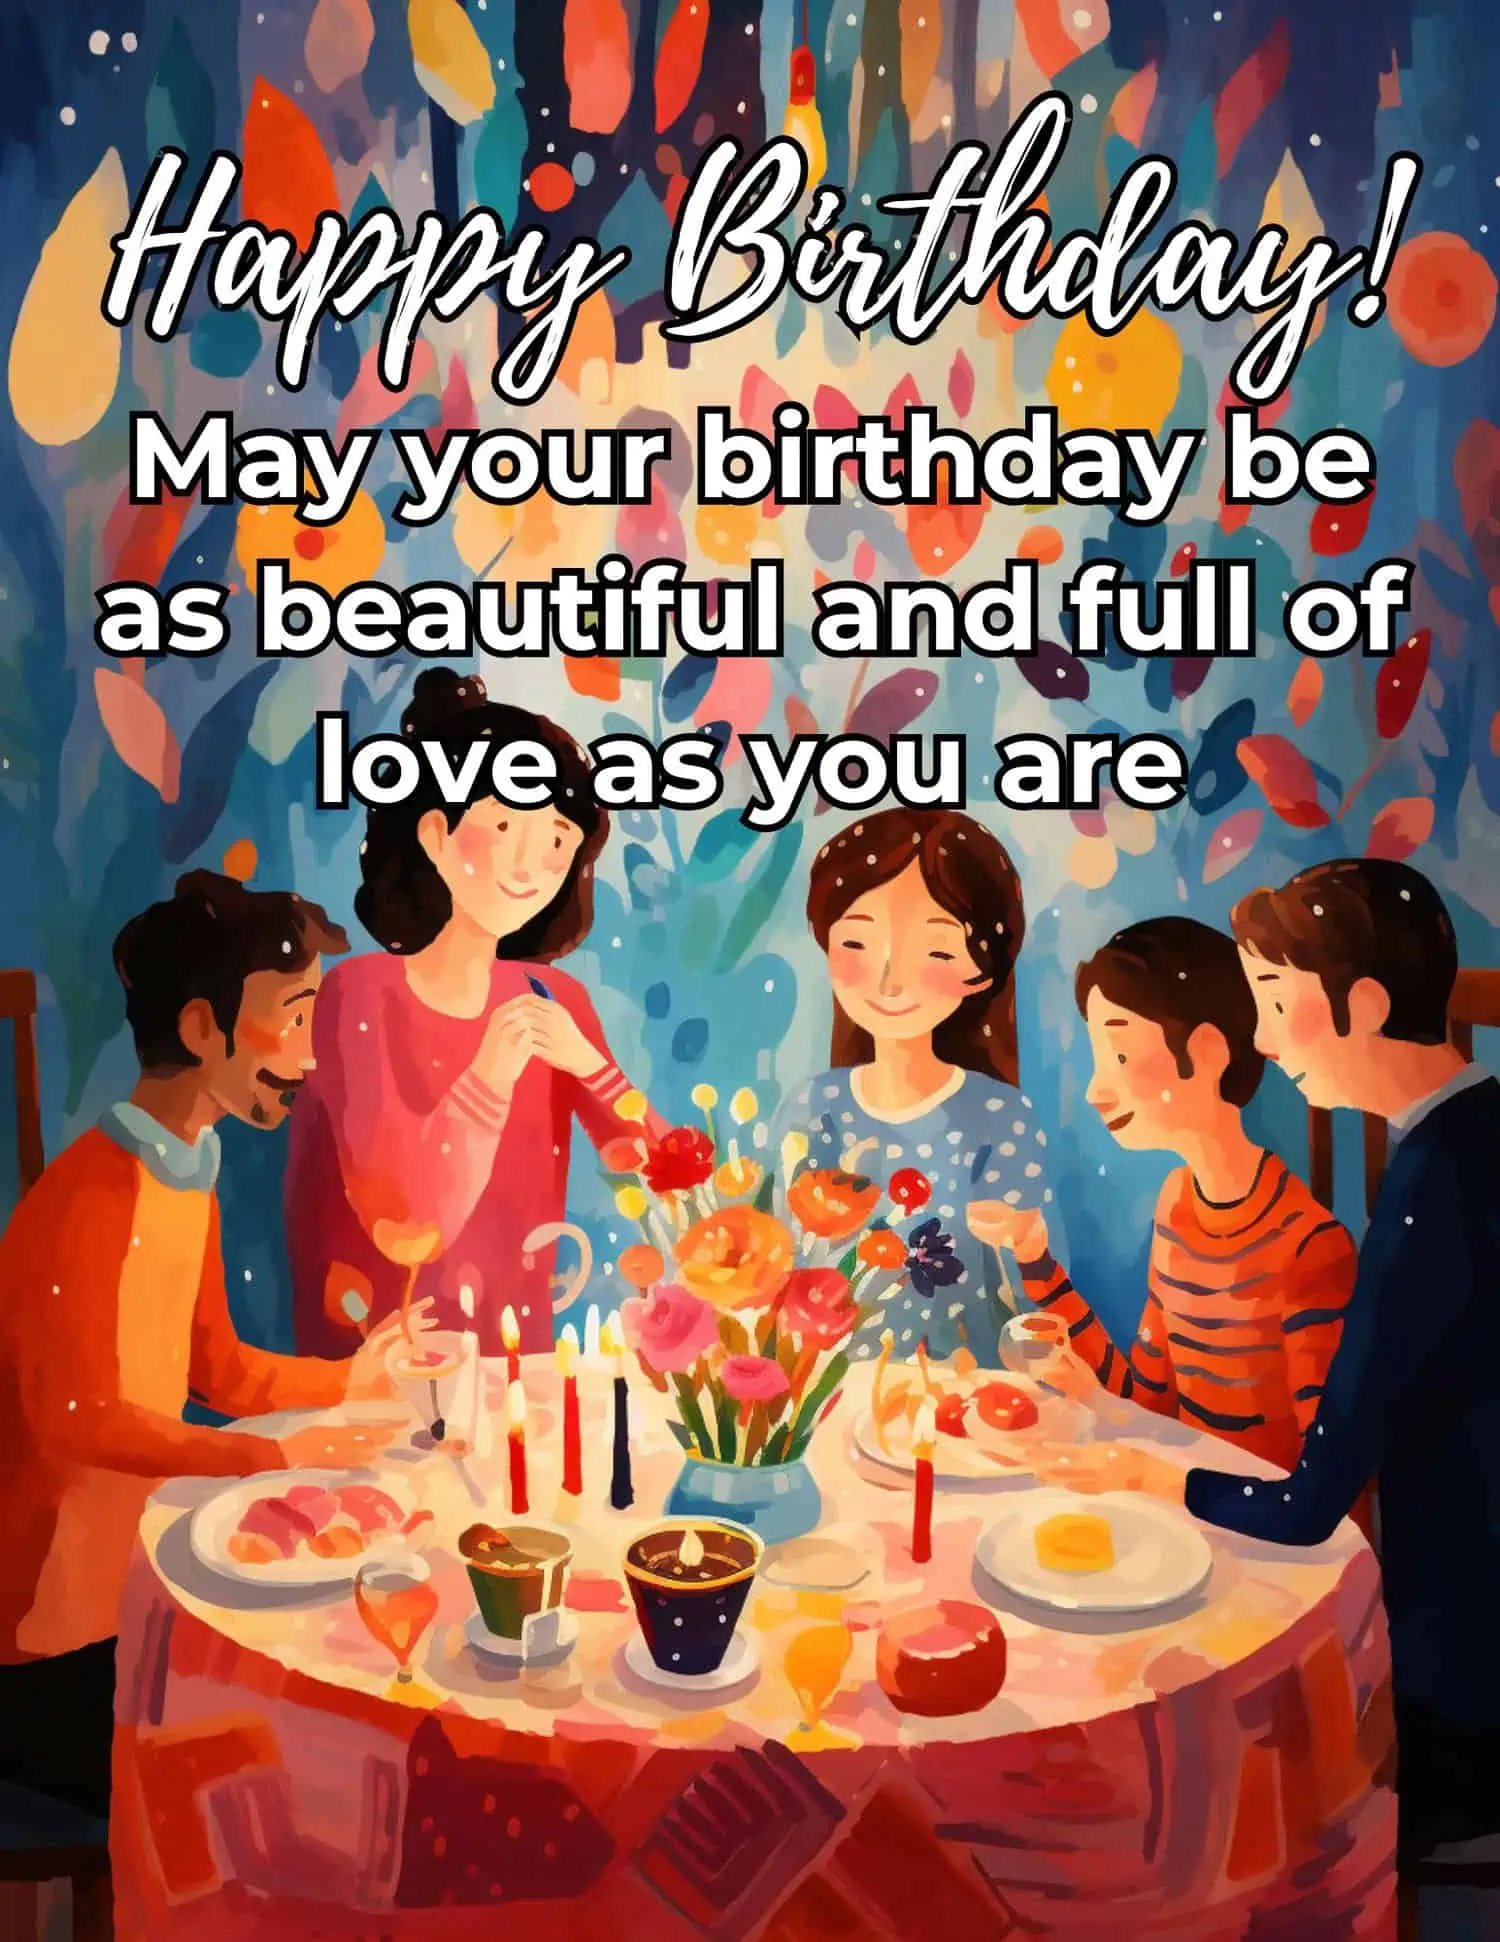 Express your deepest love and wishes with these heartfelt birthday prayers and blessings, perfect for celebrating the special day of your girlfriend or wife.